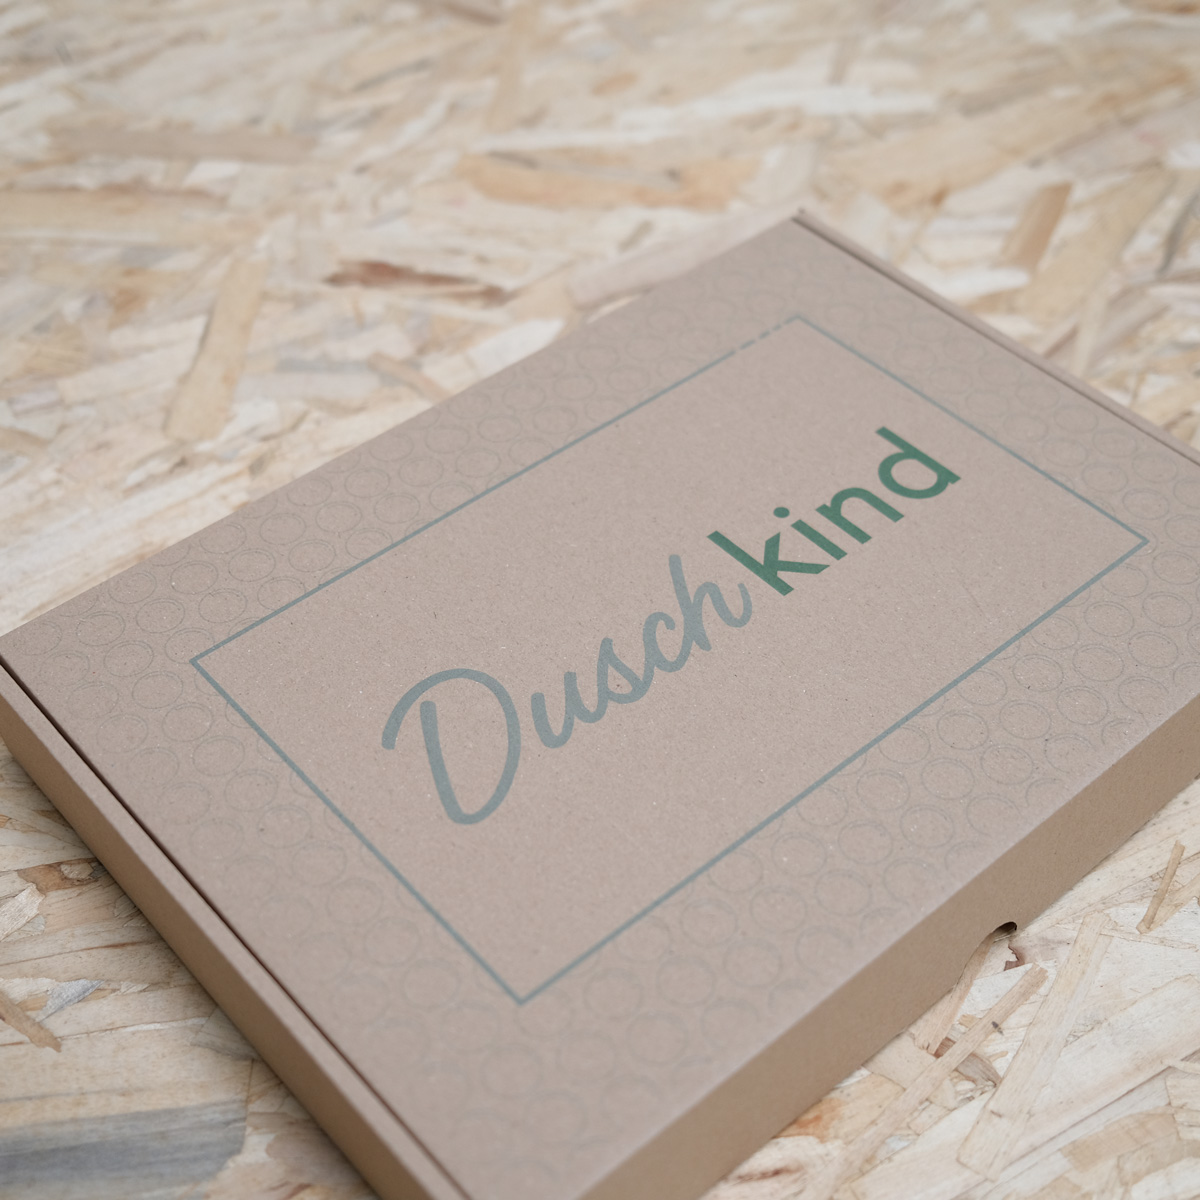 printed cardboxes and doybags